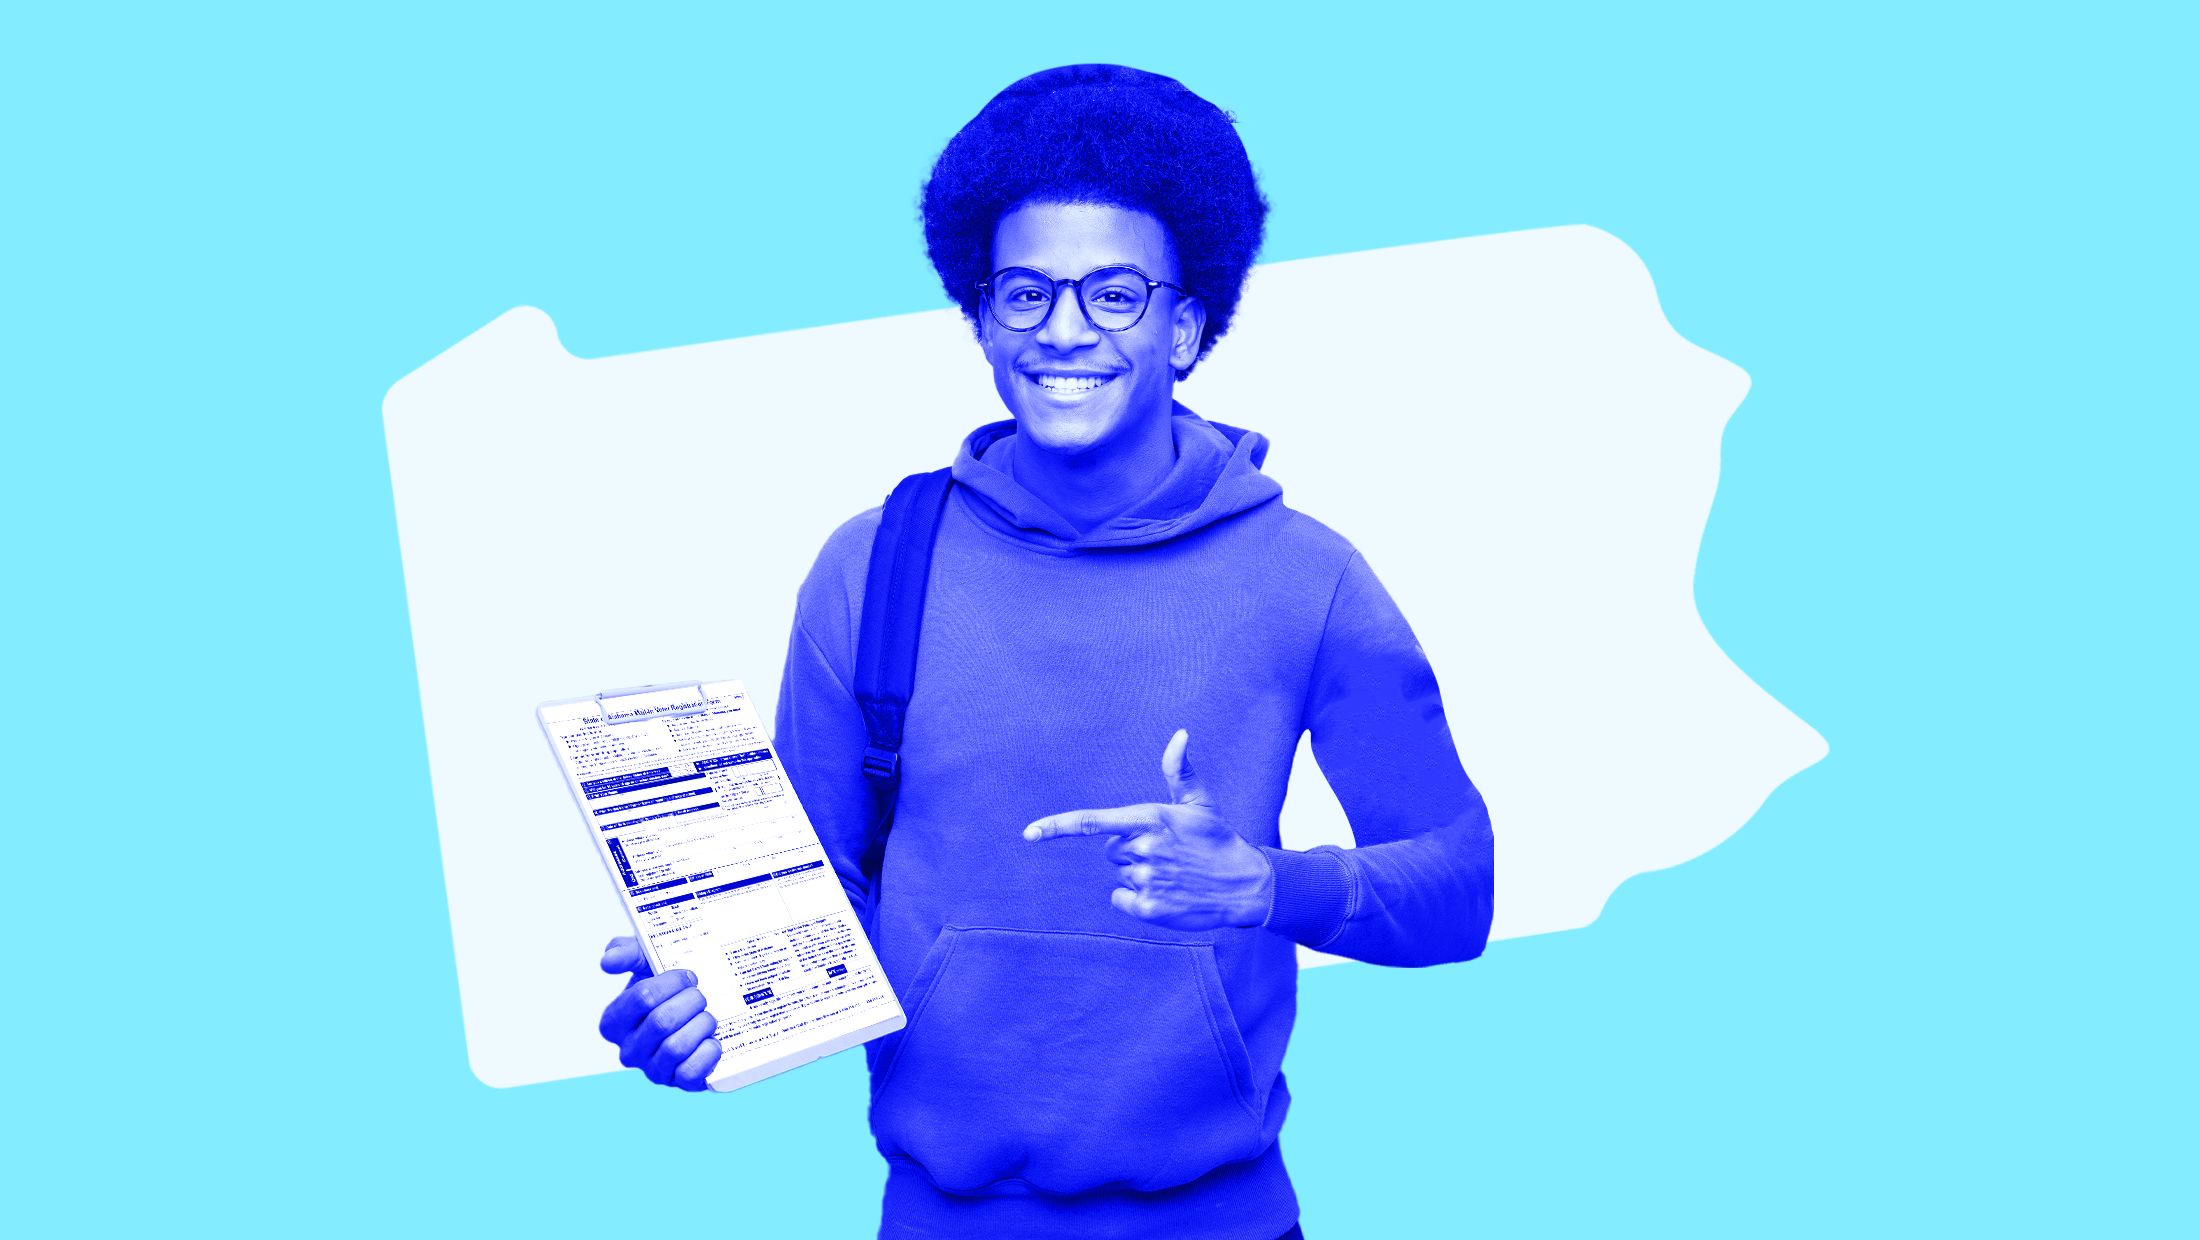 Light blue background with a man standing in front of the Pennsylvania state shape holding and pointing to a voter registration form on a clipboard.